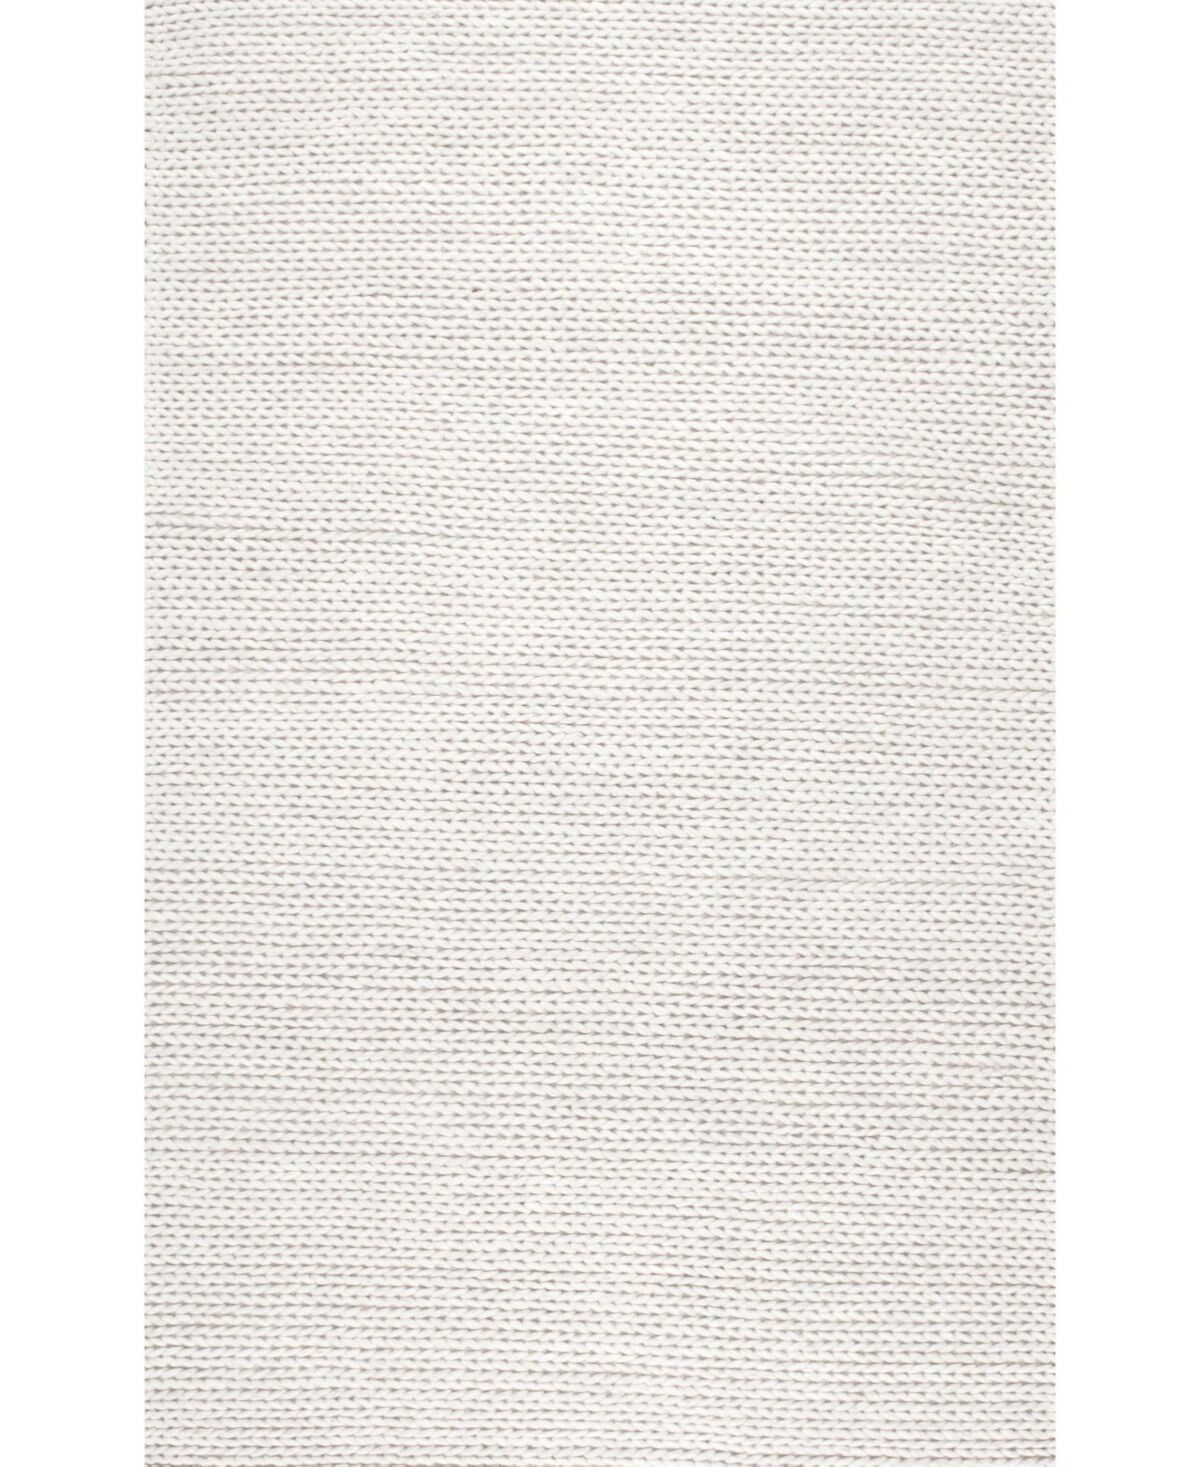 nuLoom Textures Handwoven Caryatid Solid 8' x 10' Area Rug - Off White